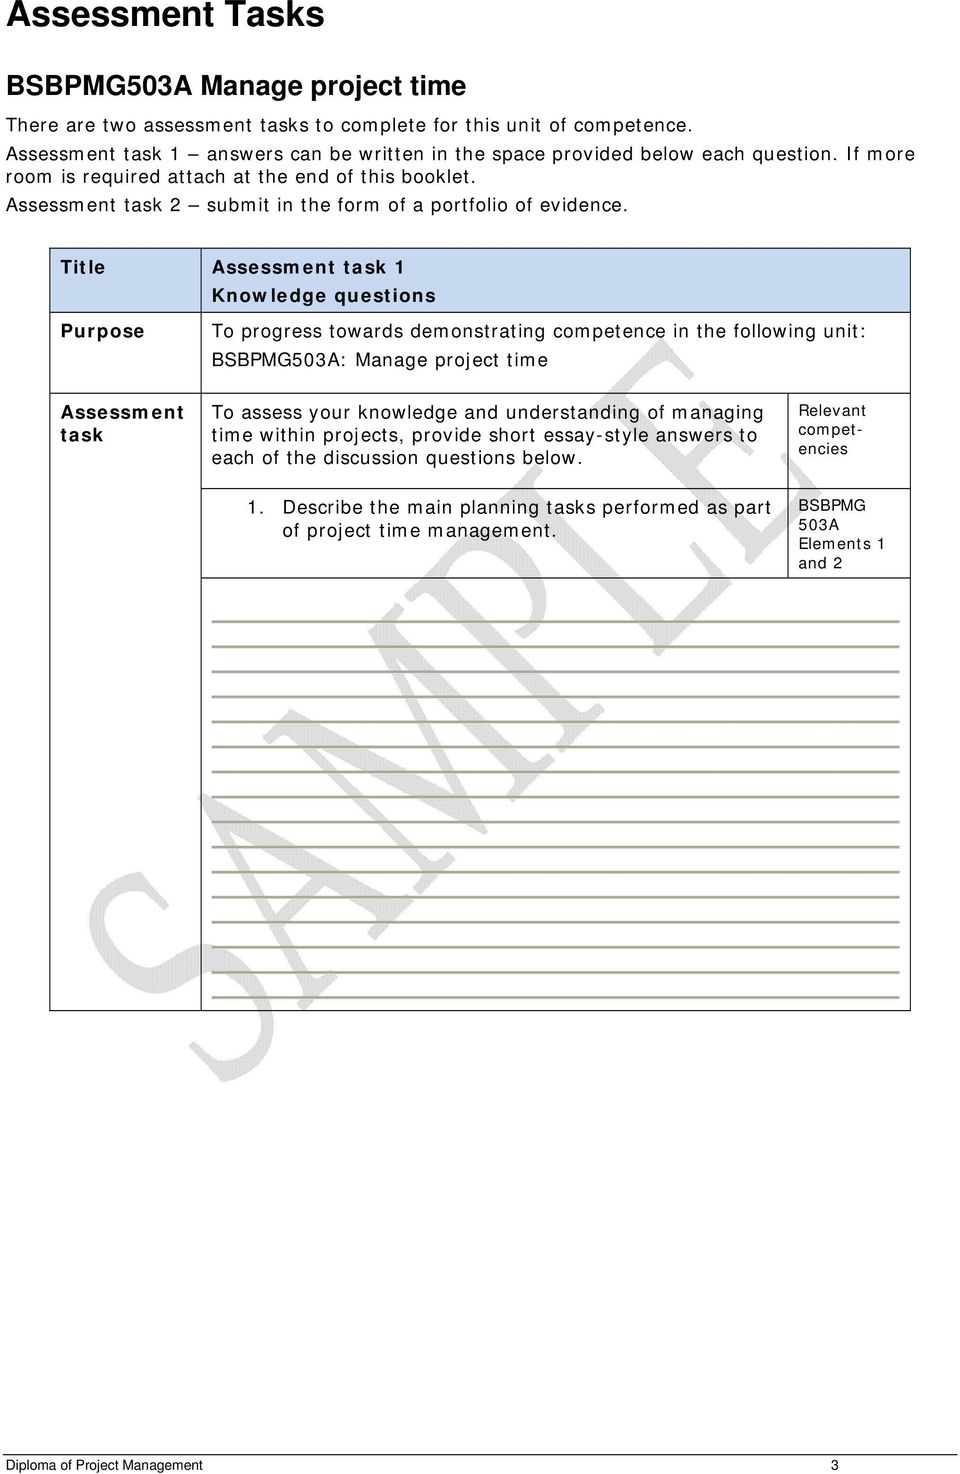 Title Assessment task 1 Knowledge questions Purpose To progress towards demonstrating competence in the following unit: : Manage project time Assessment task To assess your knowledge and